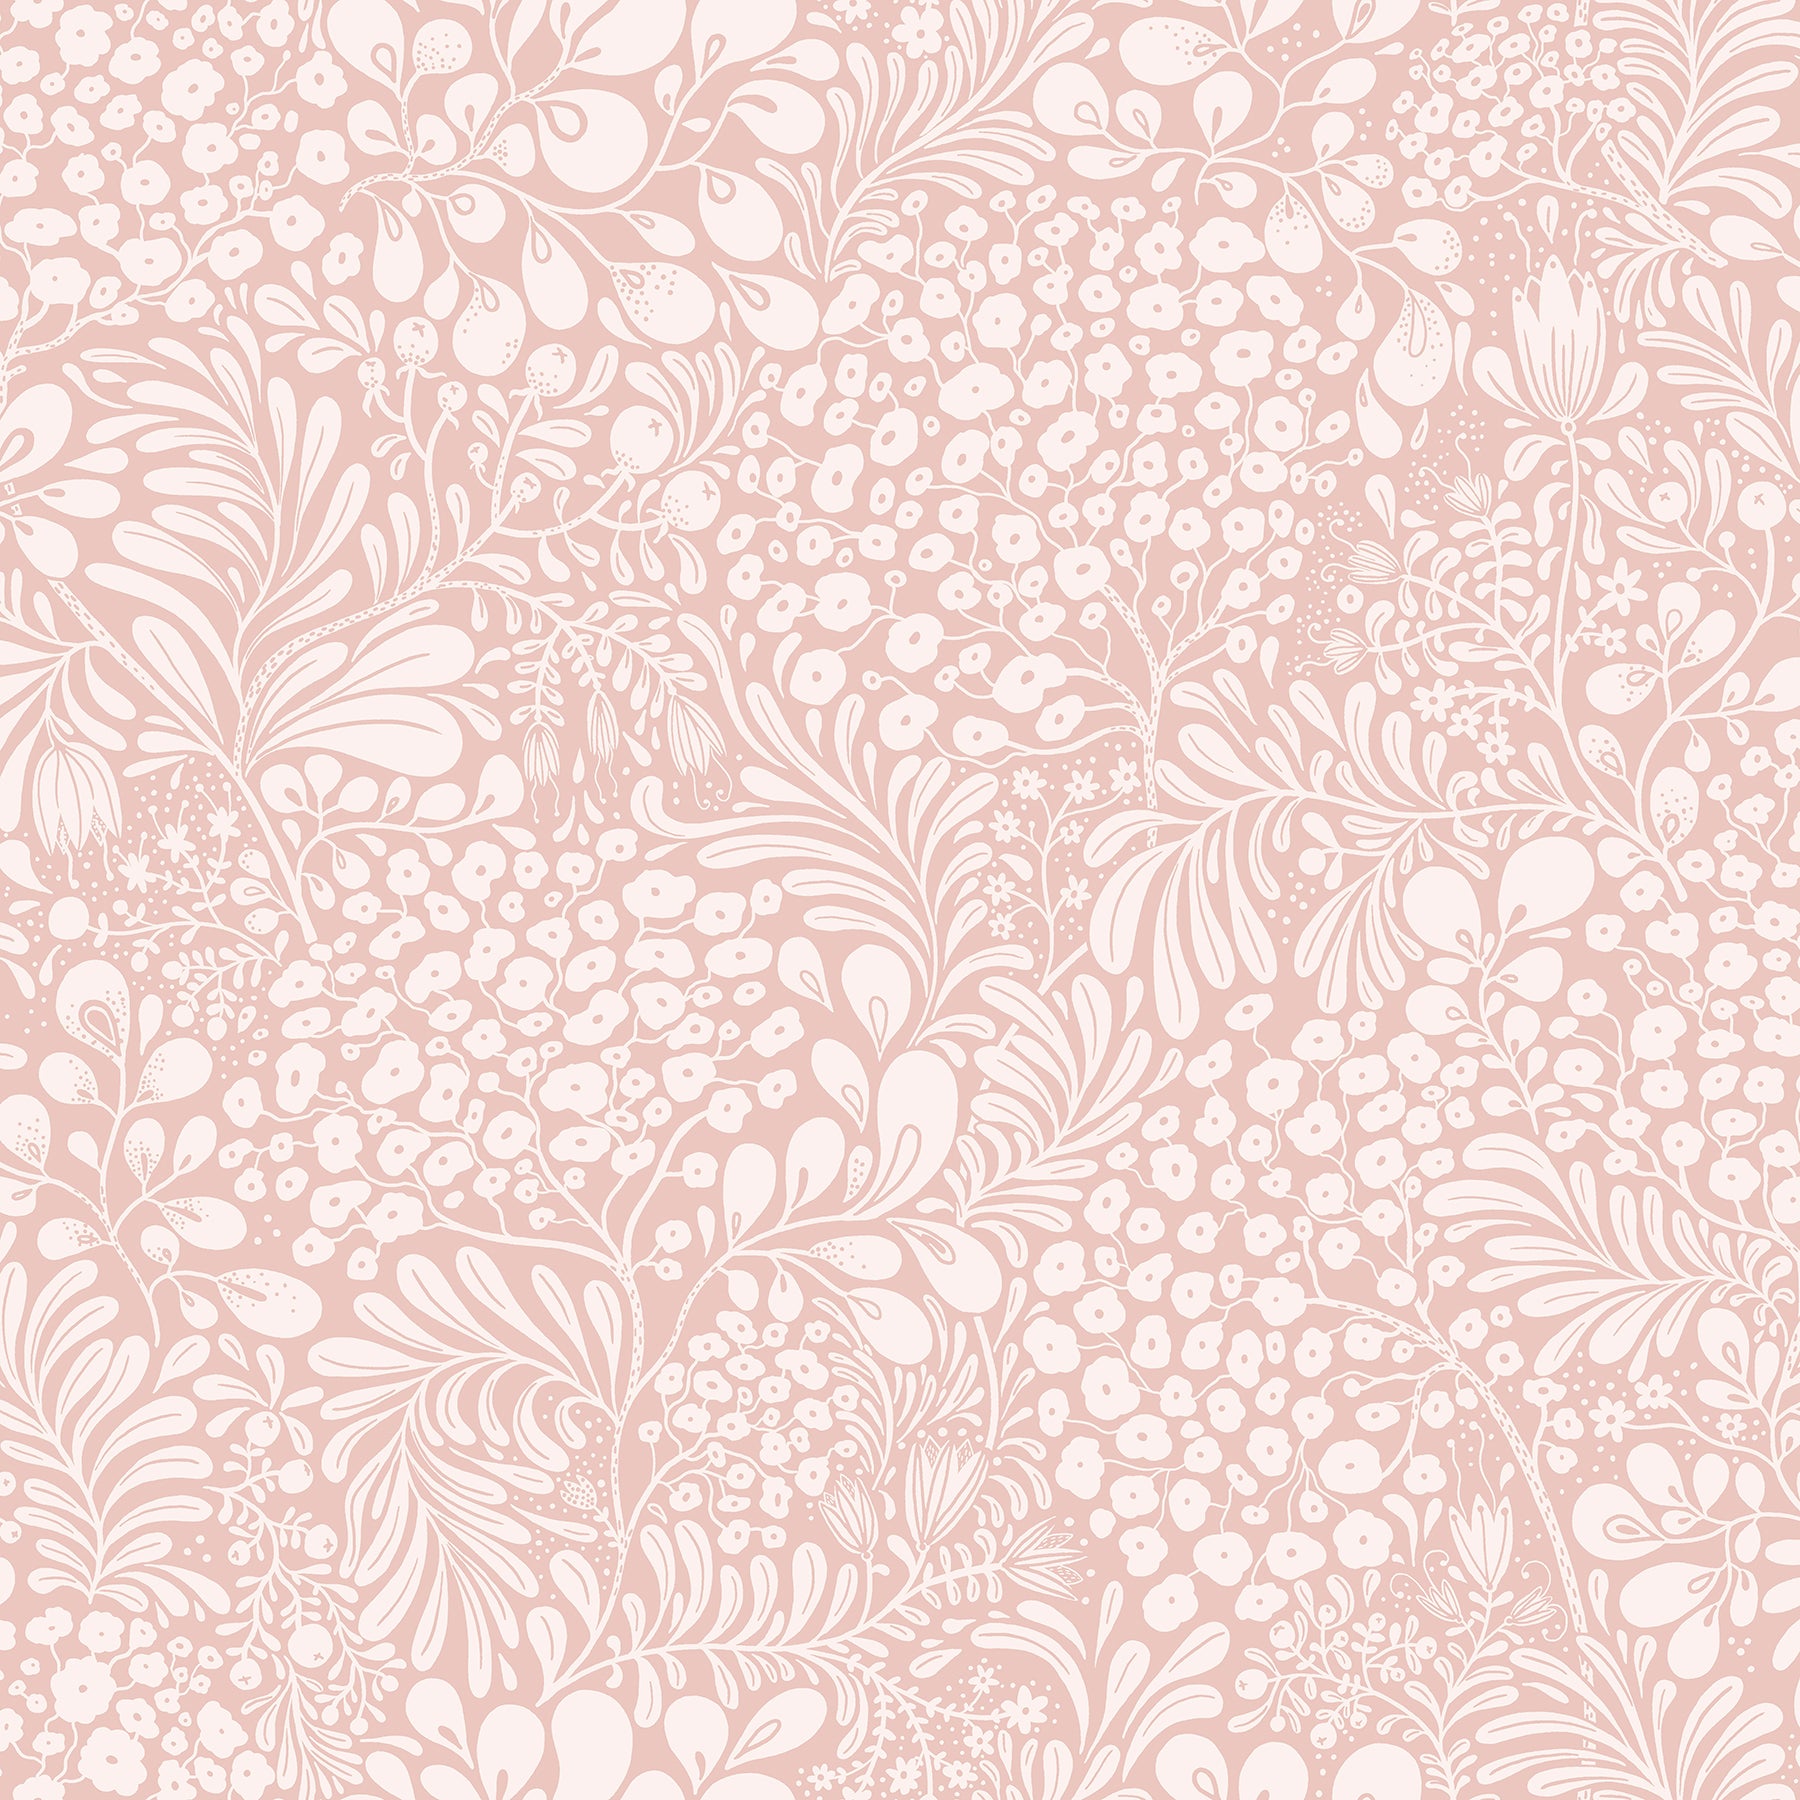 Looking for 2932-65134 Lina Siv Pink Botanical Pink A-Street Prints Wallpaper